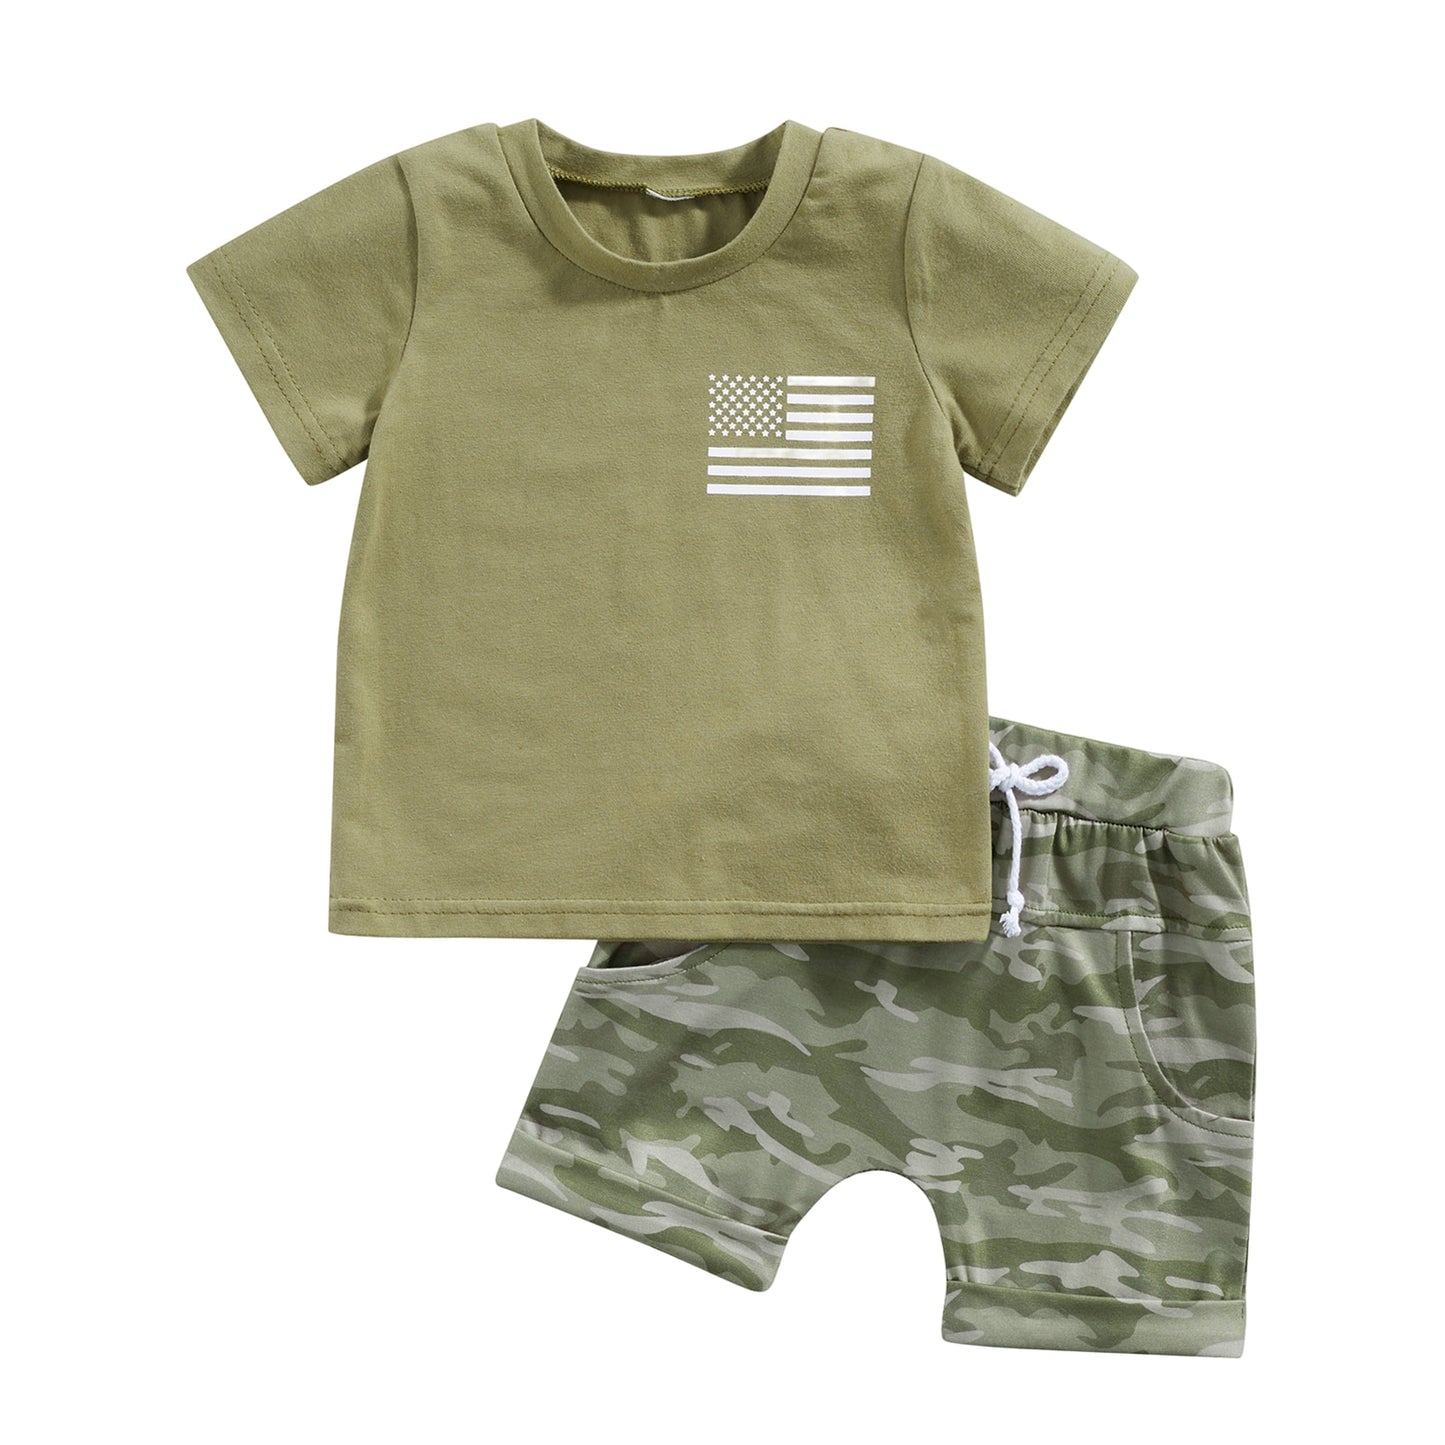 Toddler Boy Infant Clothing Independence Day Baby Boys USA Flag T-Shirt+Camouflage Shorts Drawstring Pockets 2 Piece Outfits